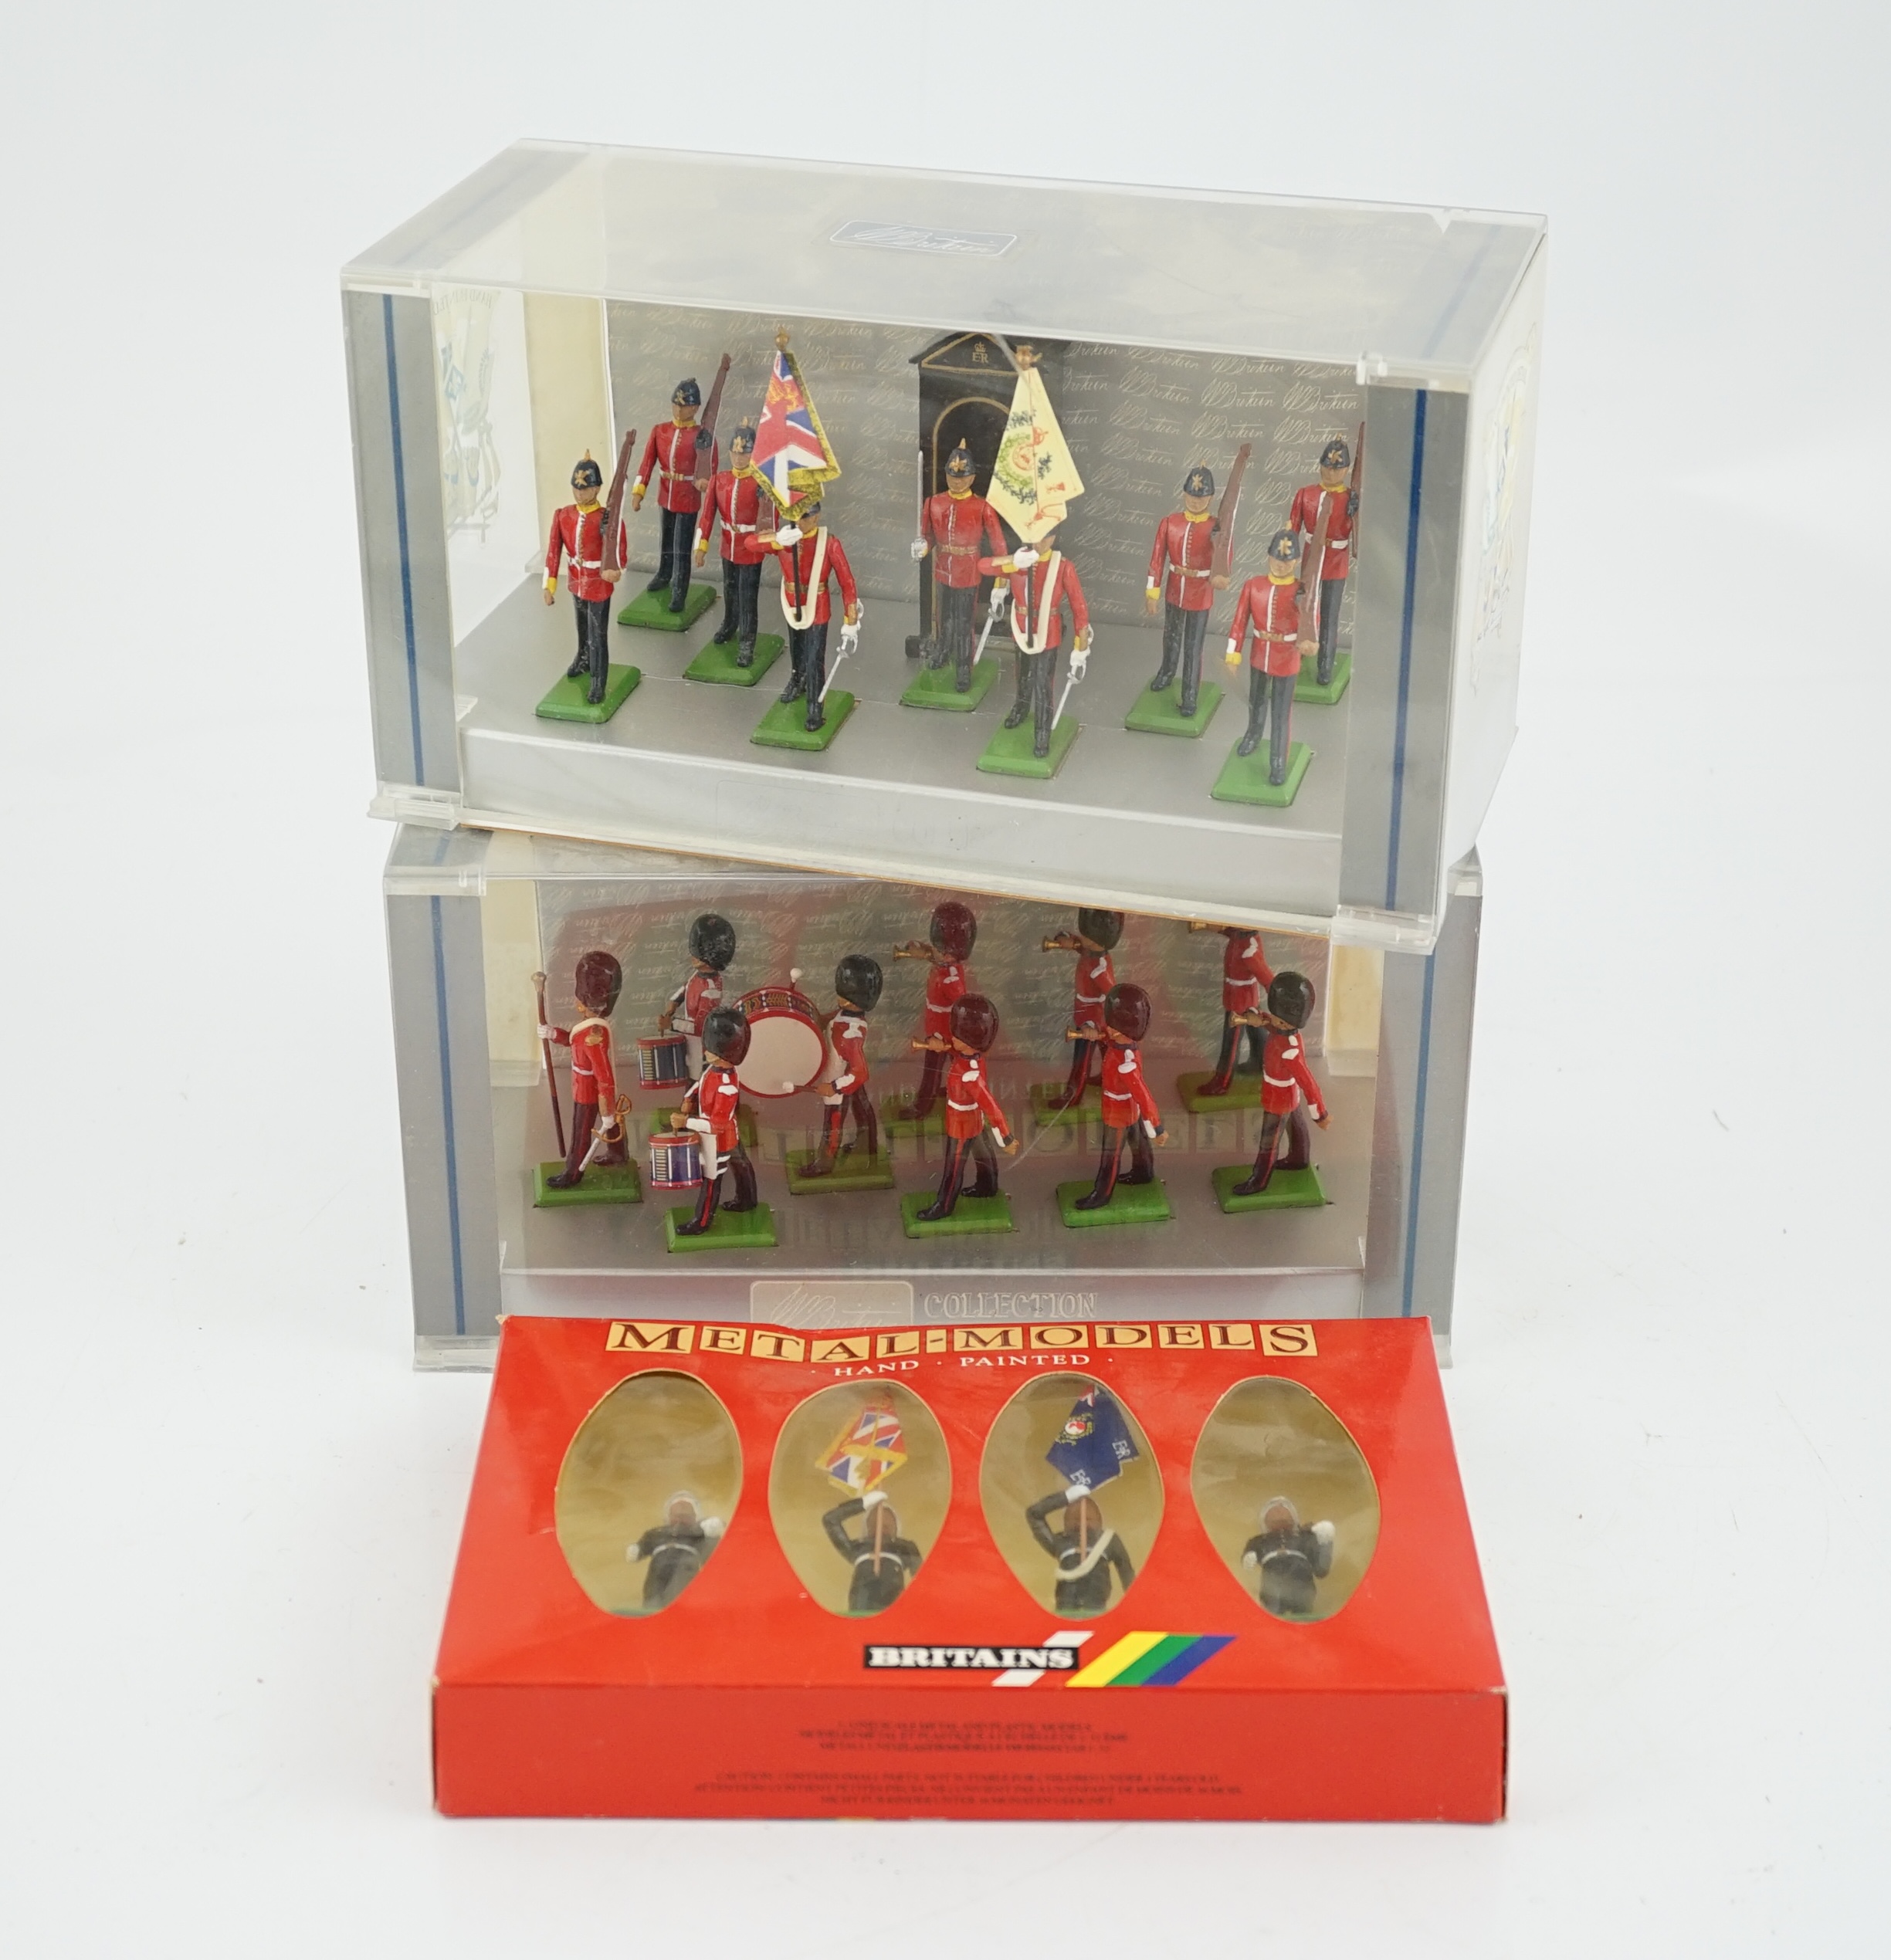 Twelve boxed 1980s and later Britains soldier sets including; two 21st Lancers (8807), U.S. Marine Corps (7303), Lifeguards (5184), Seaforth Highlanders (5185), The Irish State Coach (00254), etc.                        